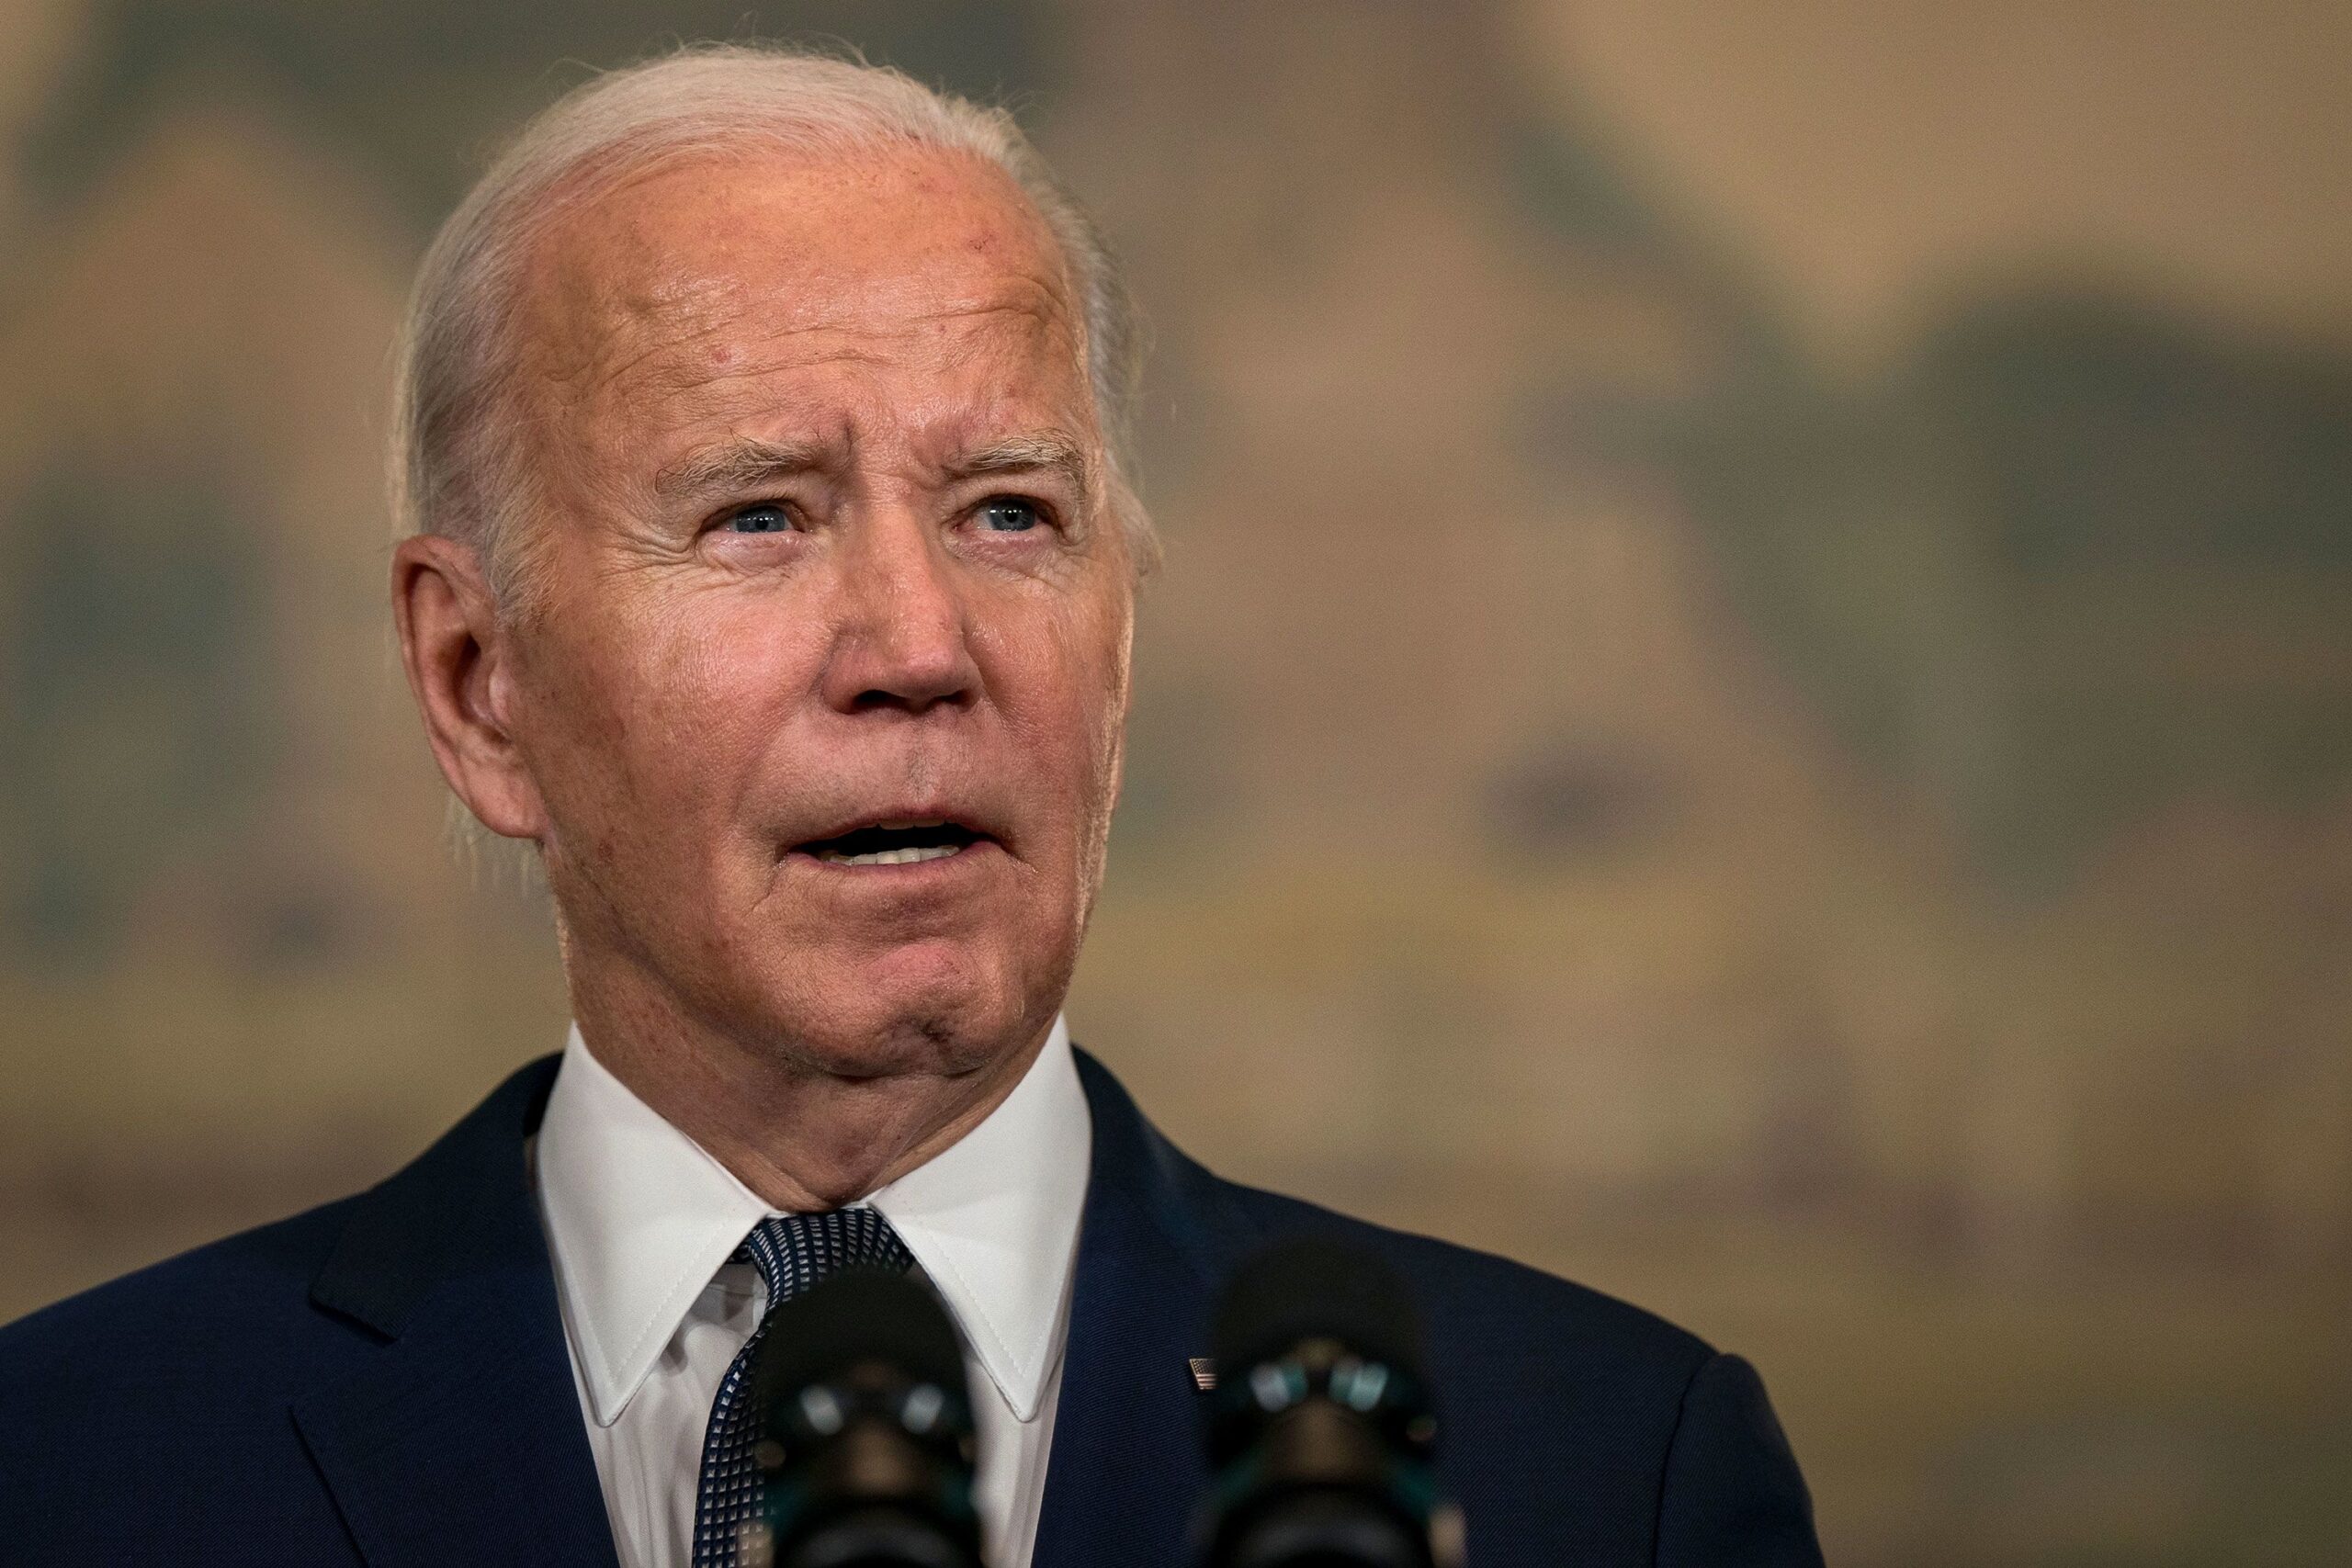 President Joe Biden took aim at violence against Palestinians in the West Bank in an op-ed publishe...